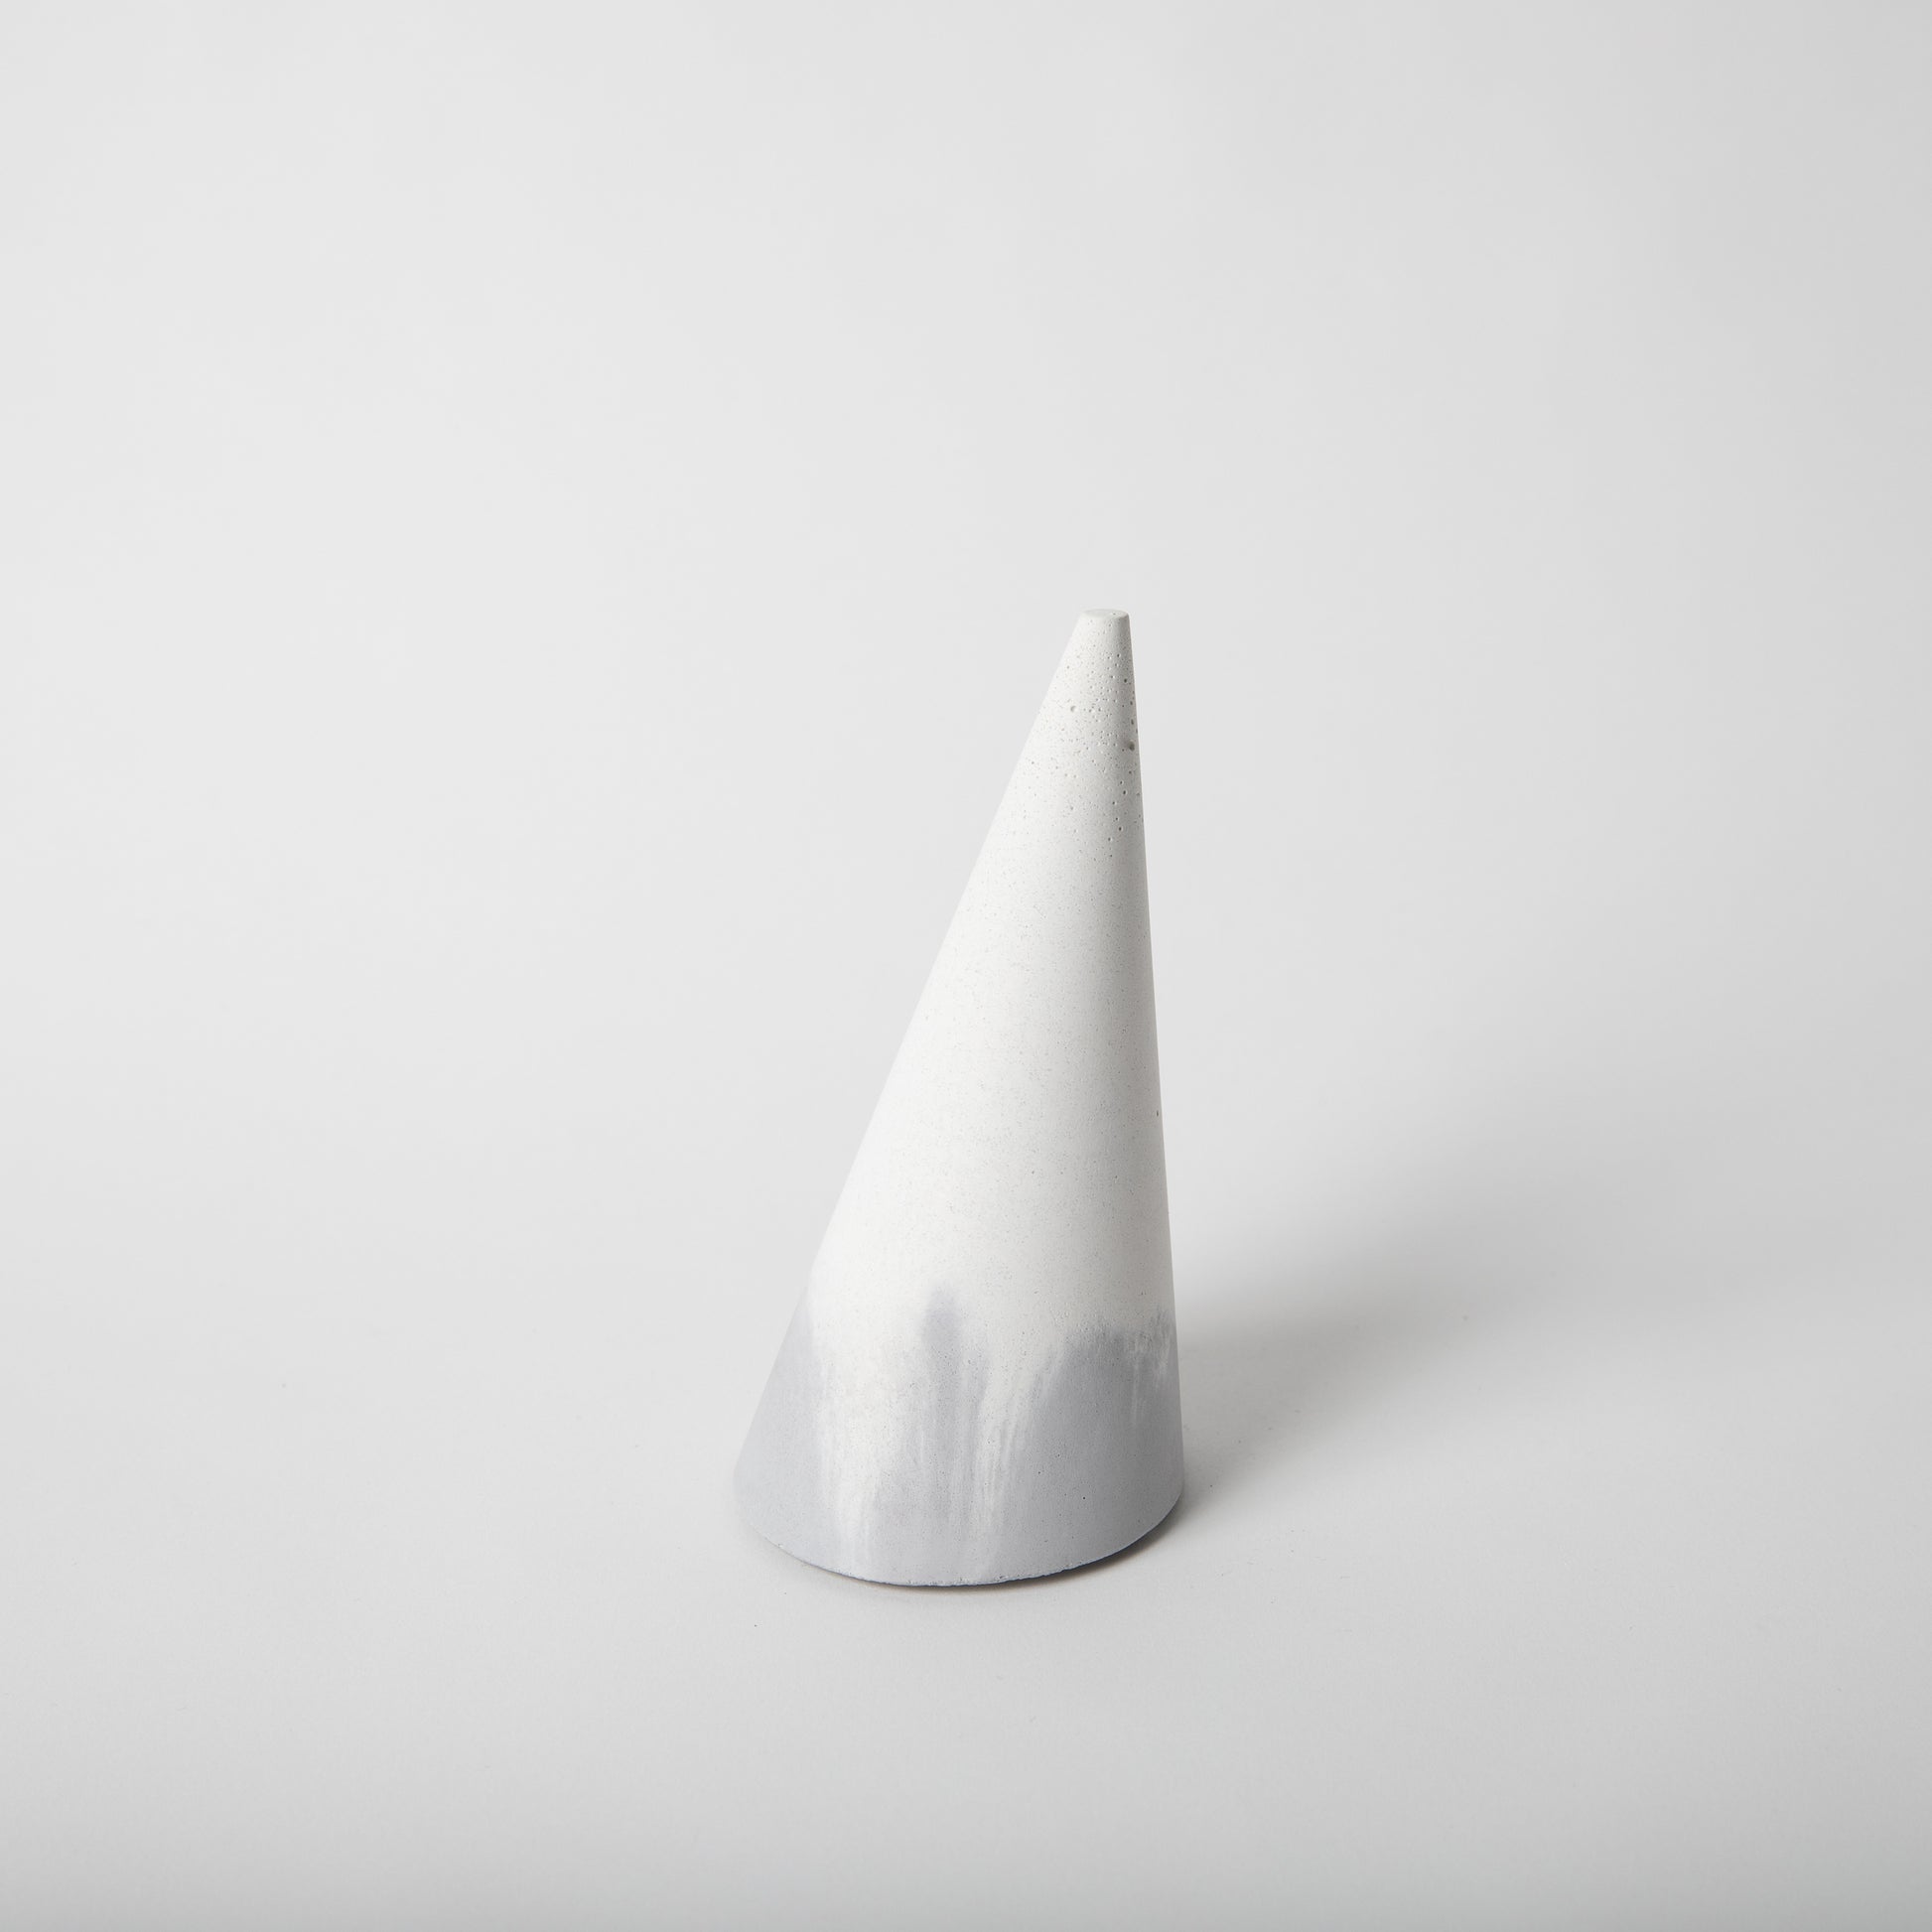 Cone shaped concrete bangle holder with cork base in grey and white.